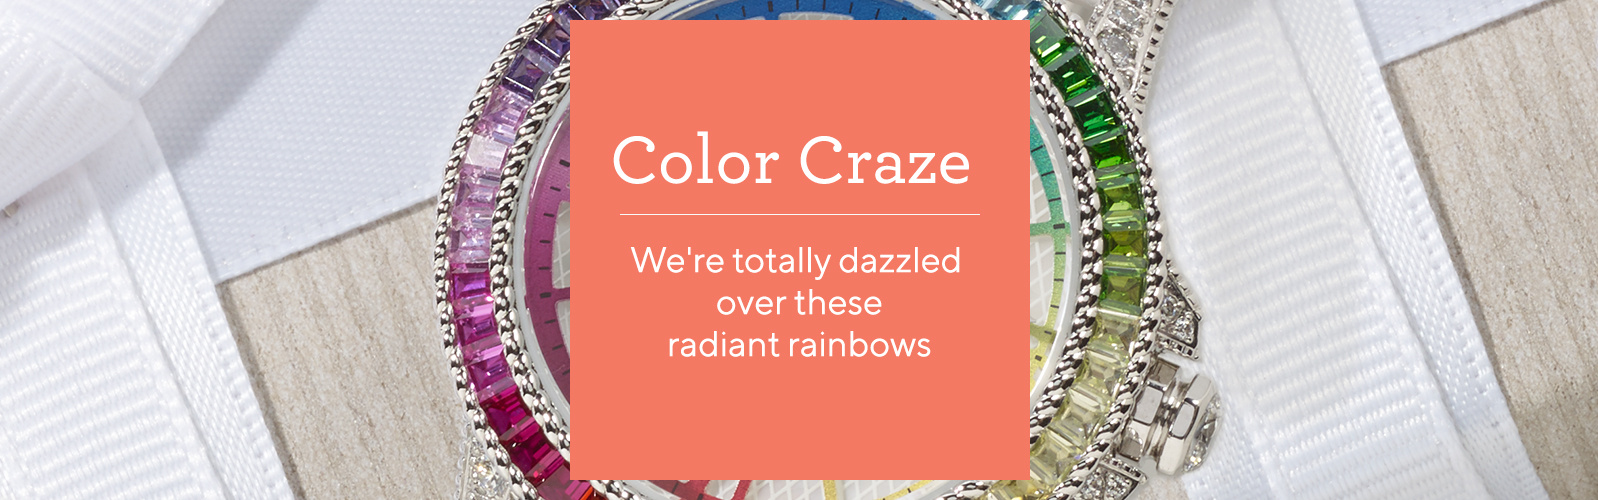 Color Craze   We're totally dazzled over these radiant rainbows